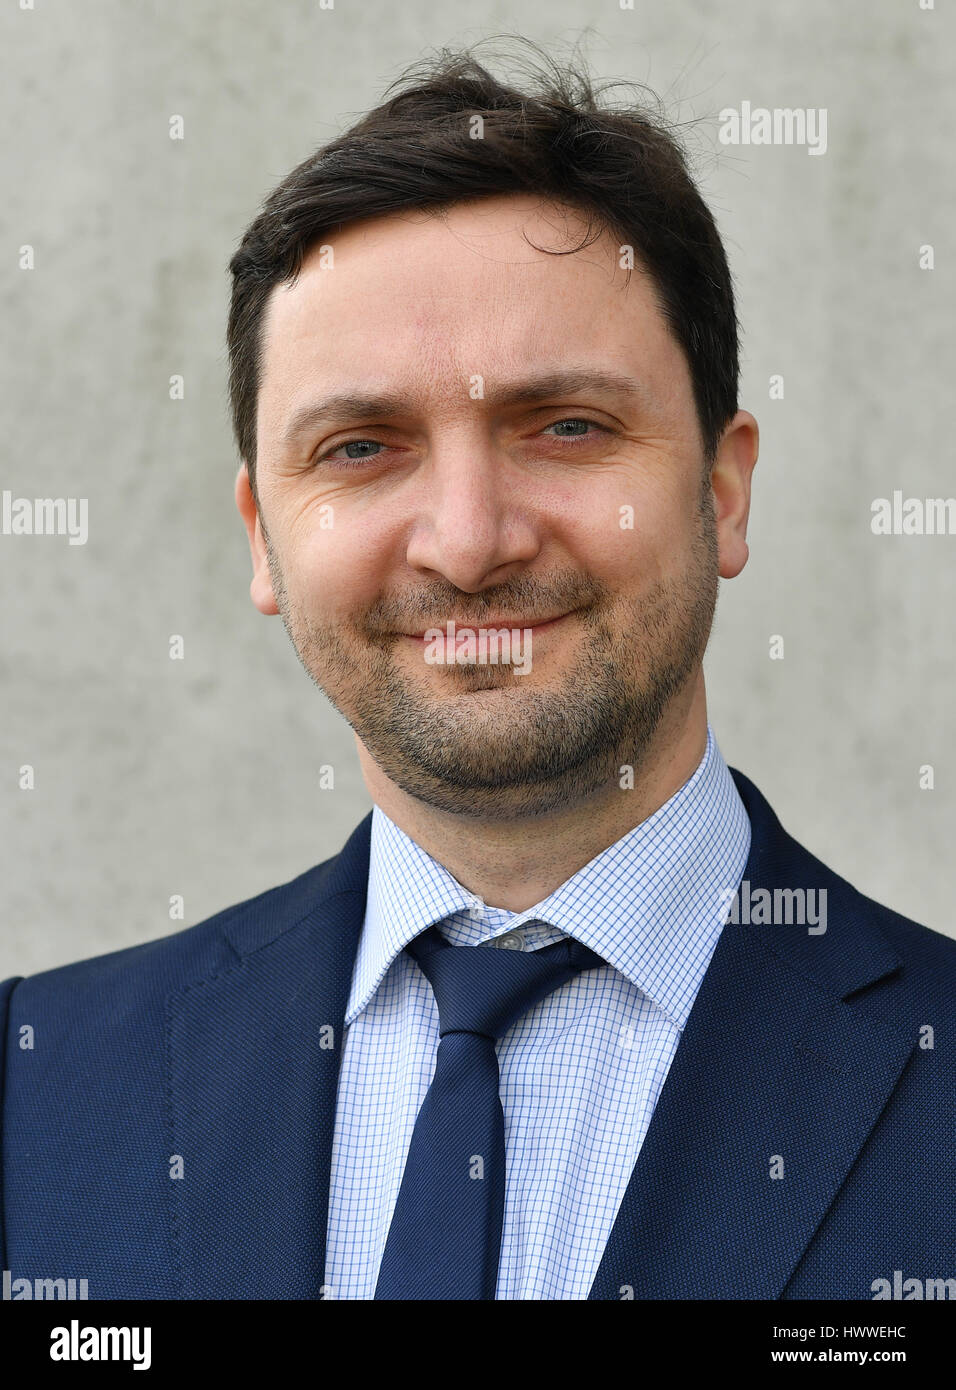 Tarkan Dogru, CEO of the Aeropharm GmbH, photographed in Rudolstadt, Germany, 15 March 2017. The 15th anniversary of the company was celebrated on the same day. The company, now part of the pharma group Novartis, derrived from the former VEB Ankerwerk and its successor. It produces asthma pharmaceuticals and eye drops that are exported to more than 50 countries. Photo: Martin Schutt/dpa-Zentralbild/dpa Stock Photo